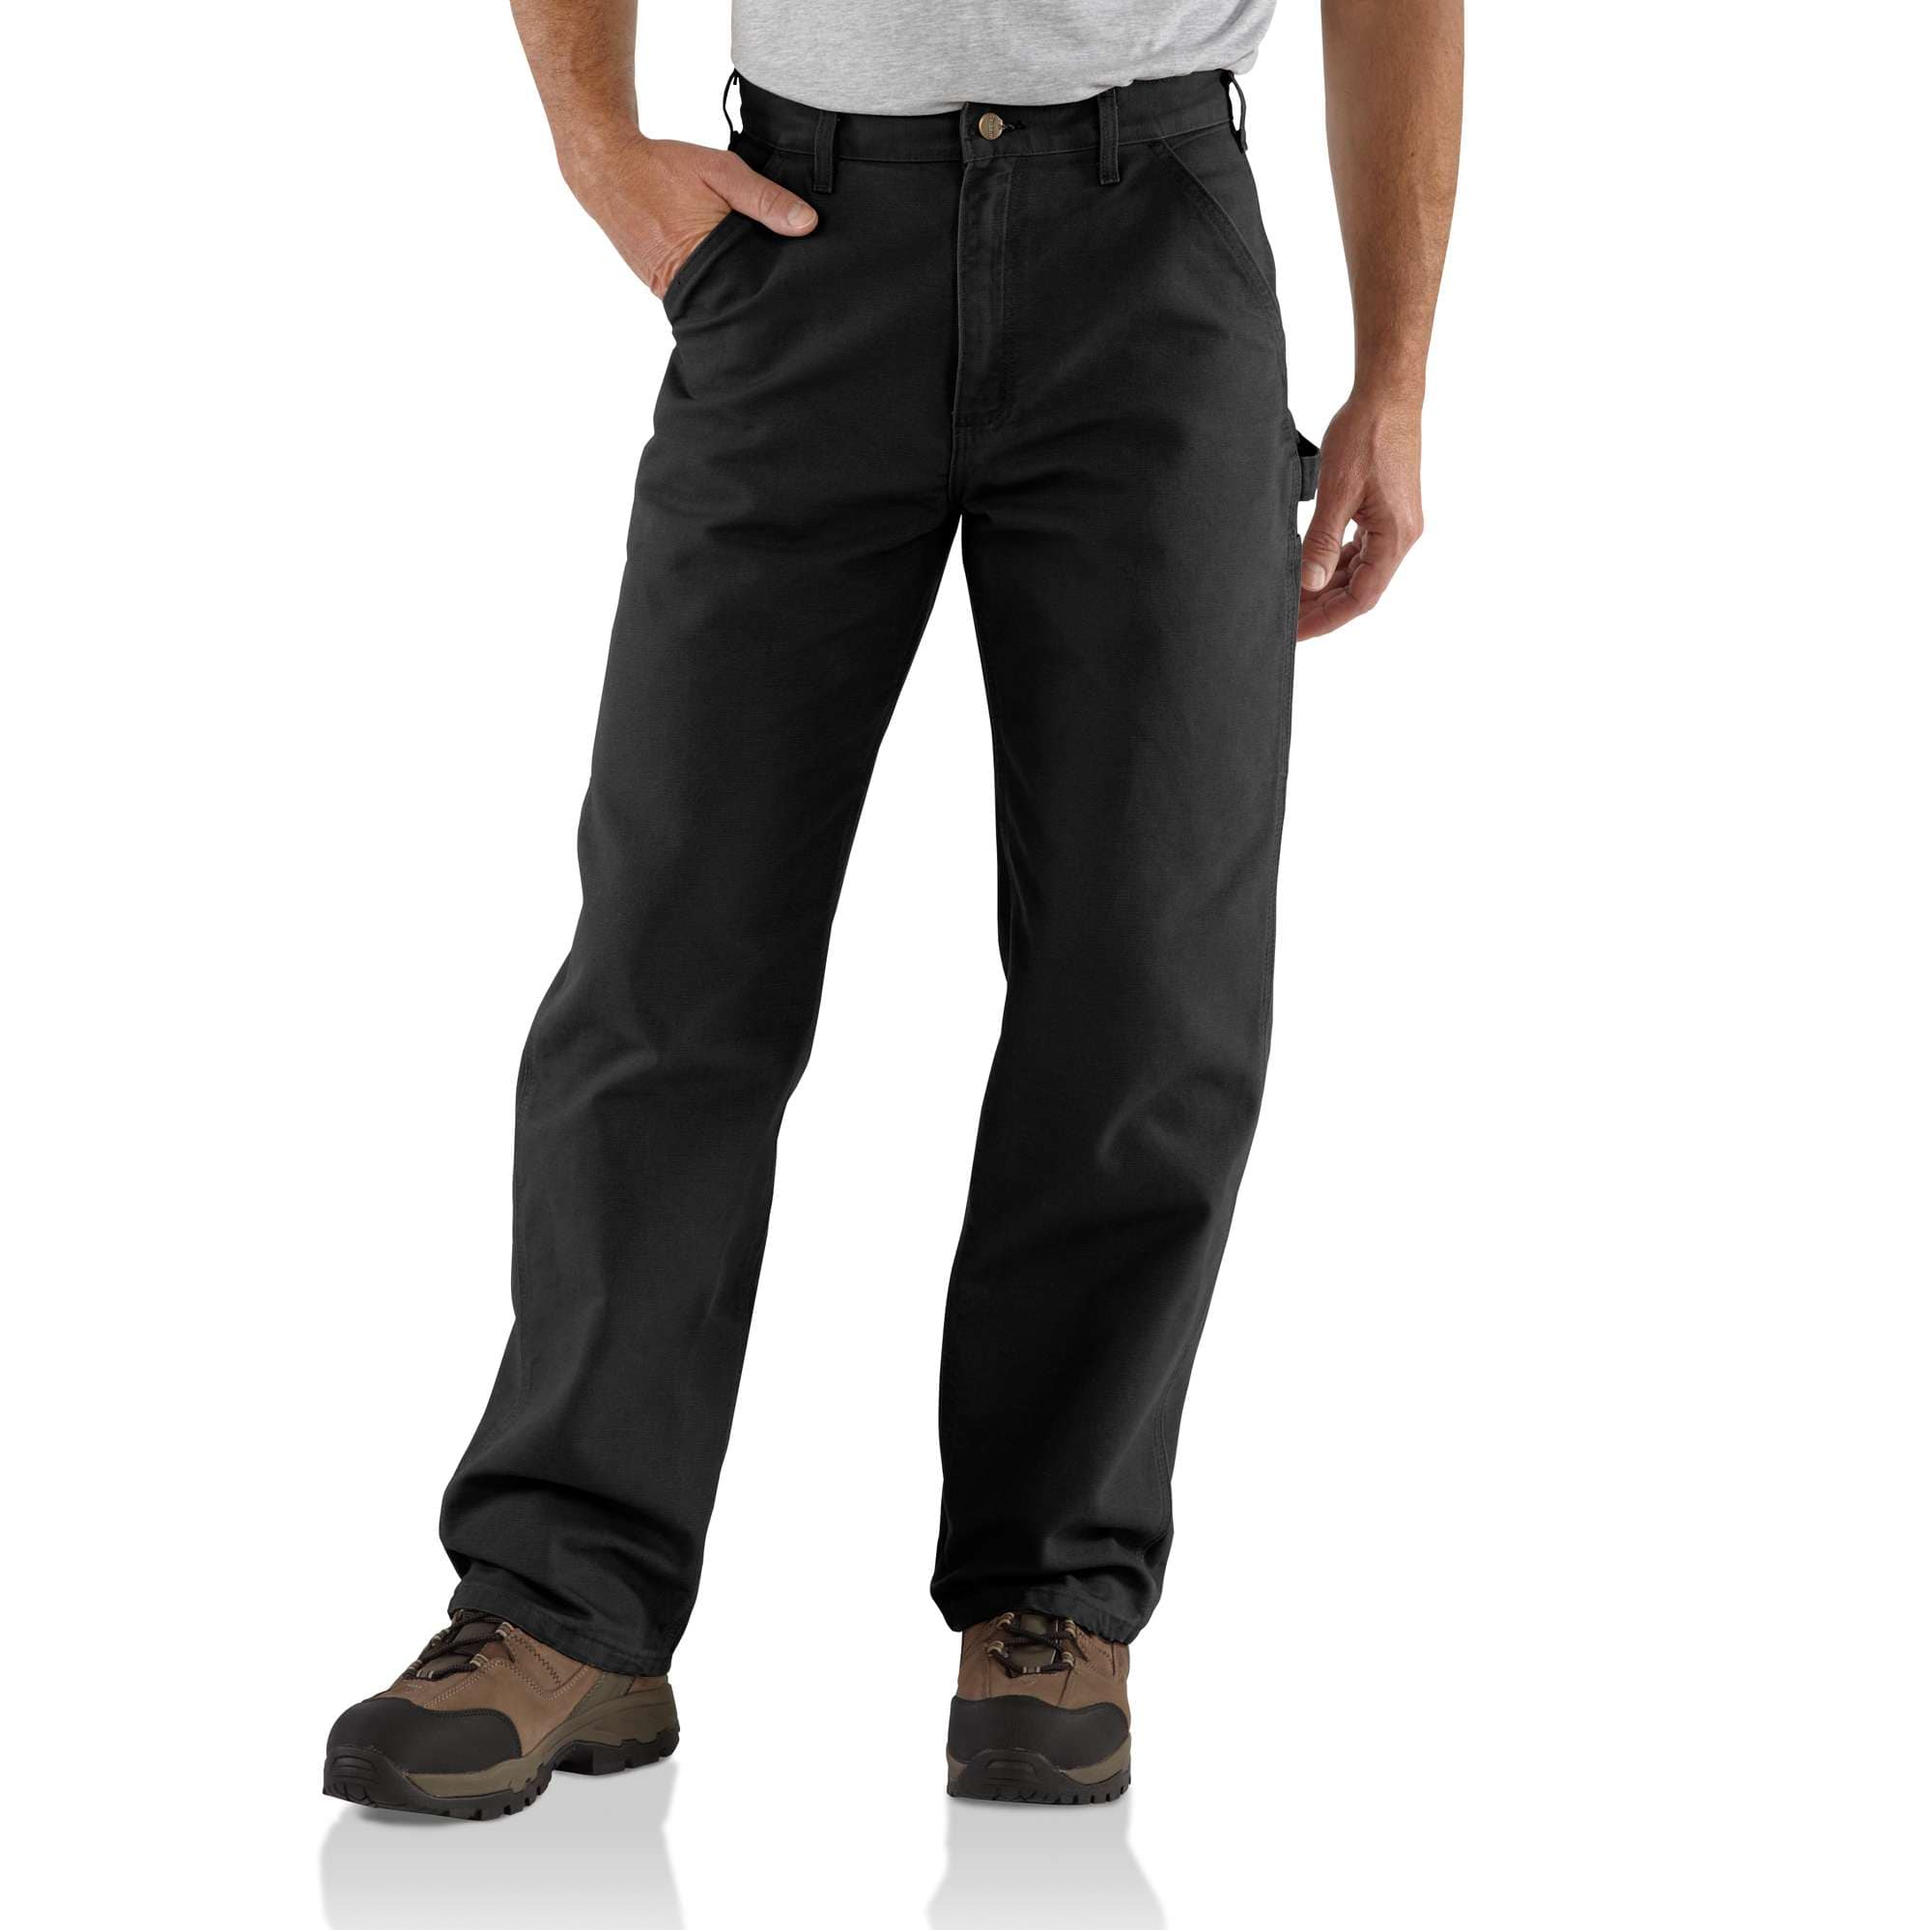 Carhartt Work Pants for sale in Chattanooga, Tennessee